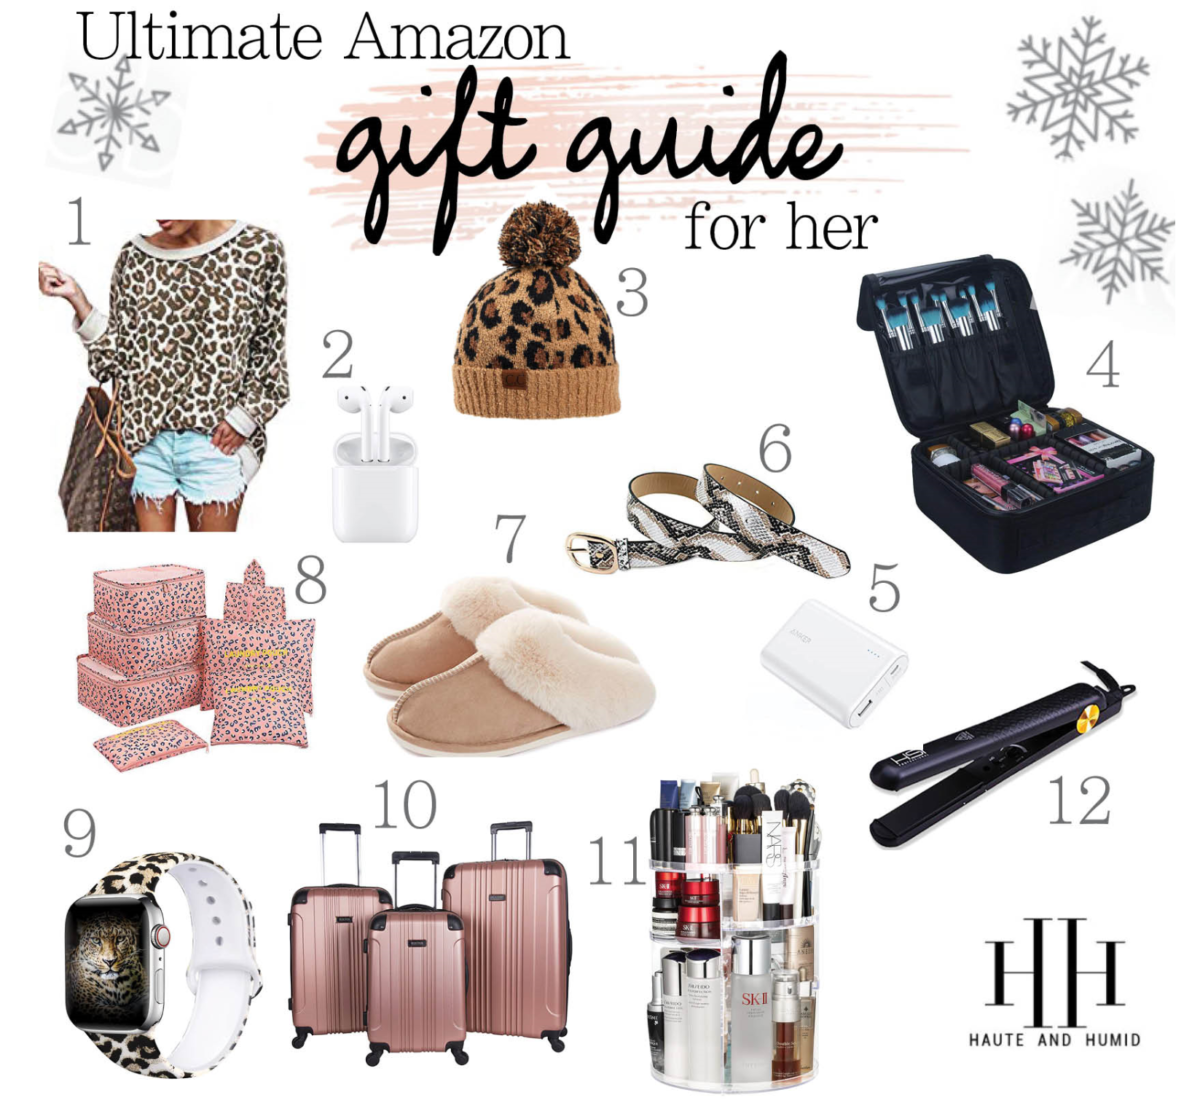 Holiday Gift Guide: 15 Amazon Gifts For Her She’ll Love